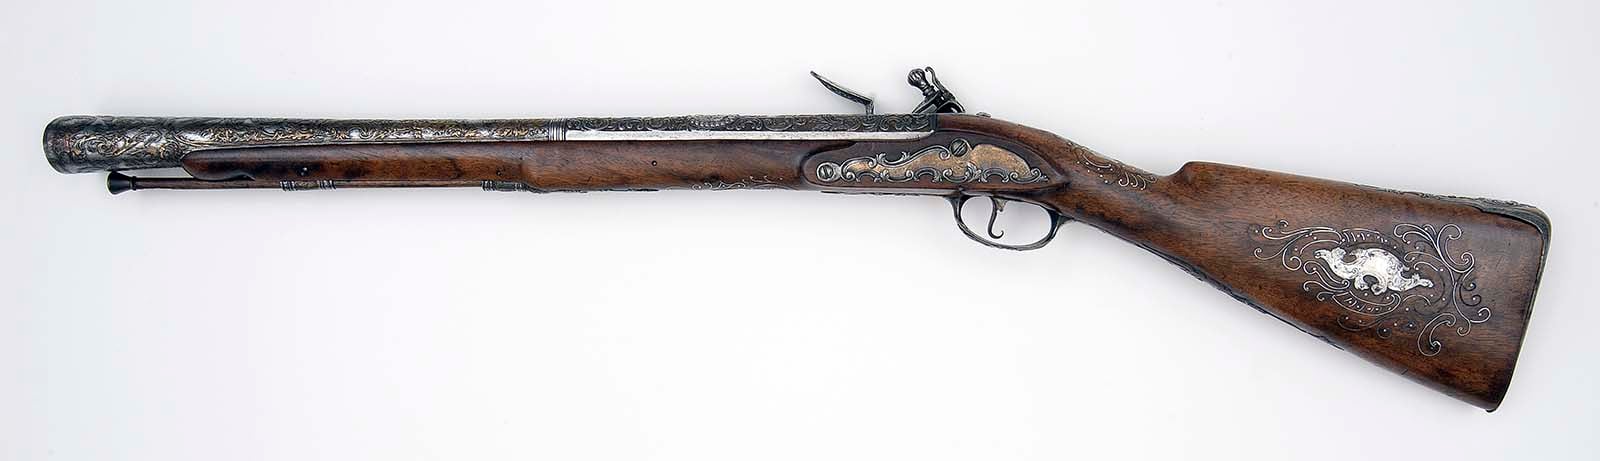 Russian Flintlock Blunderbuss. Museum Purchase, partially funded by the James H. Woods Foundation. 1986.16.1